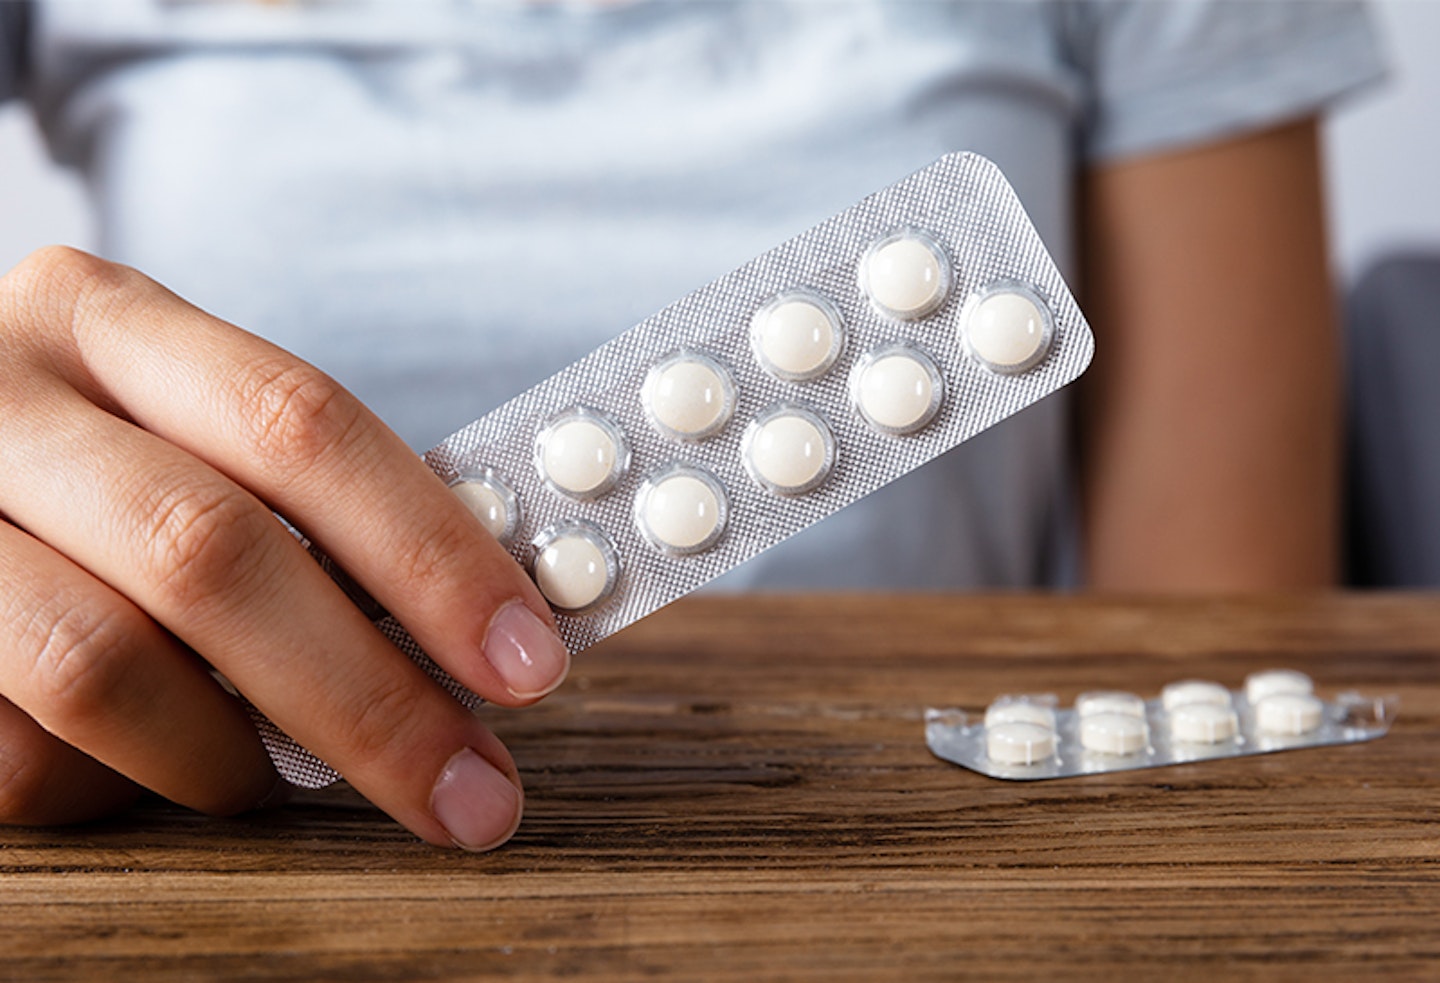 How soon after coming off the pill can you get pregnant?